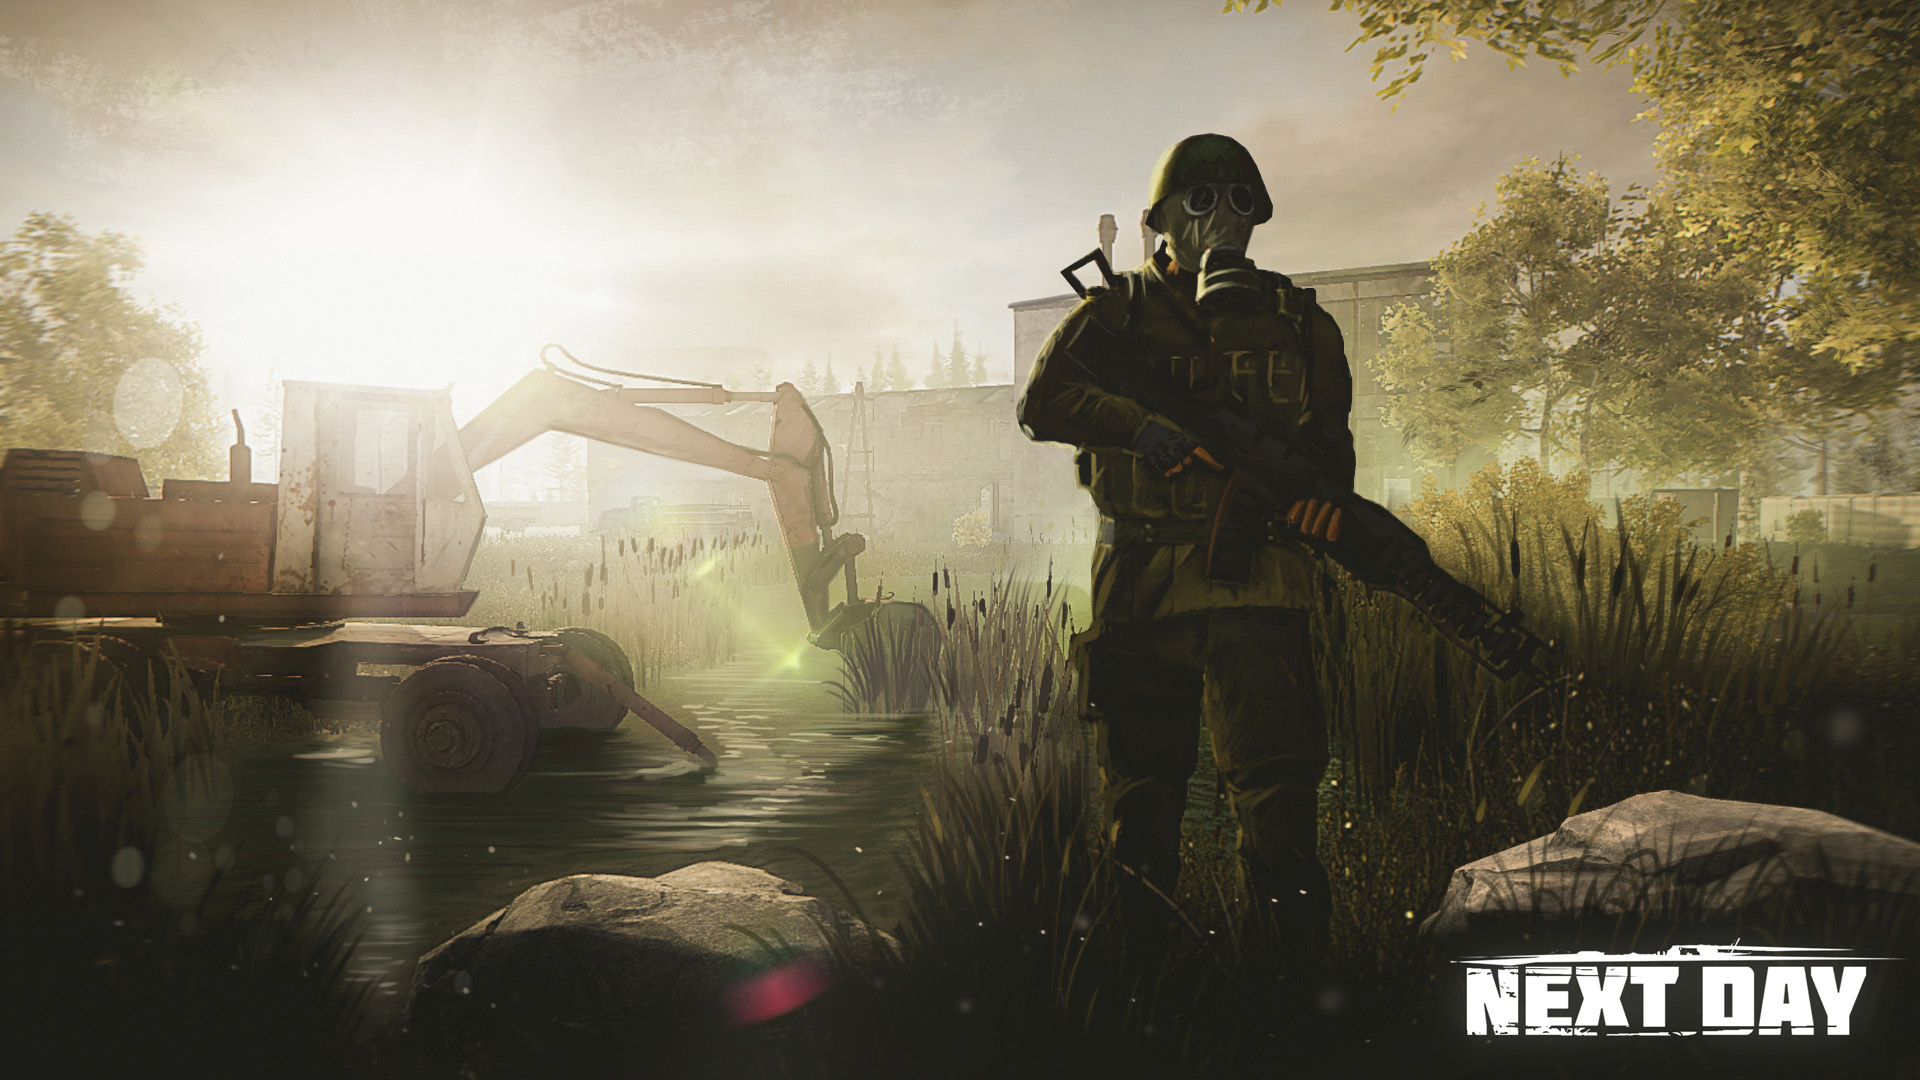 Next Day Survival HD Wallpaper Background Image